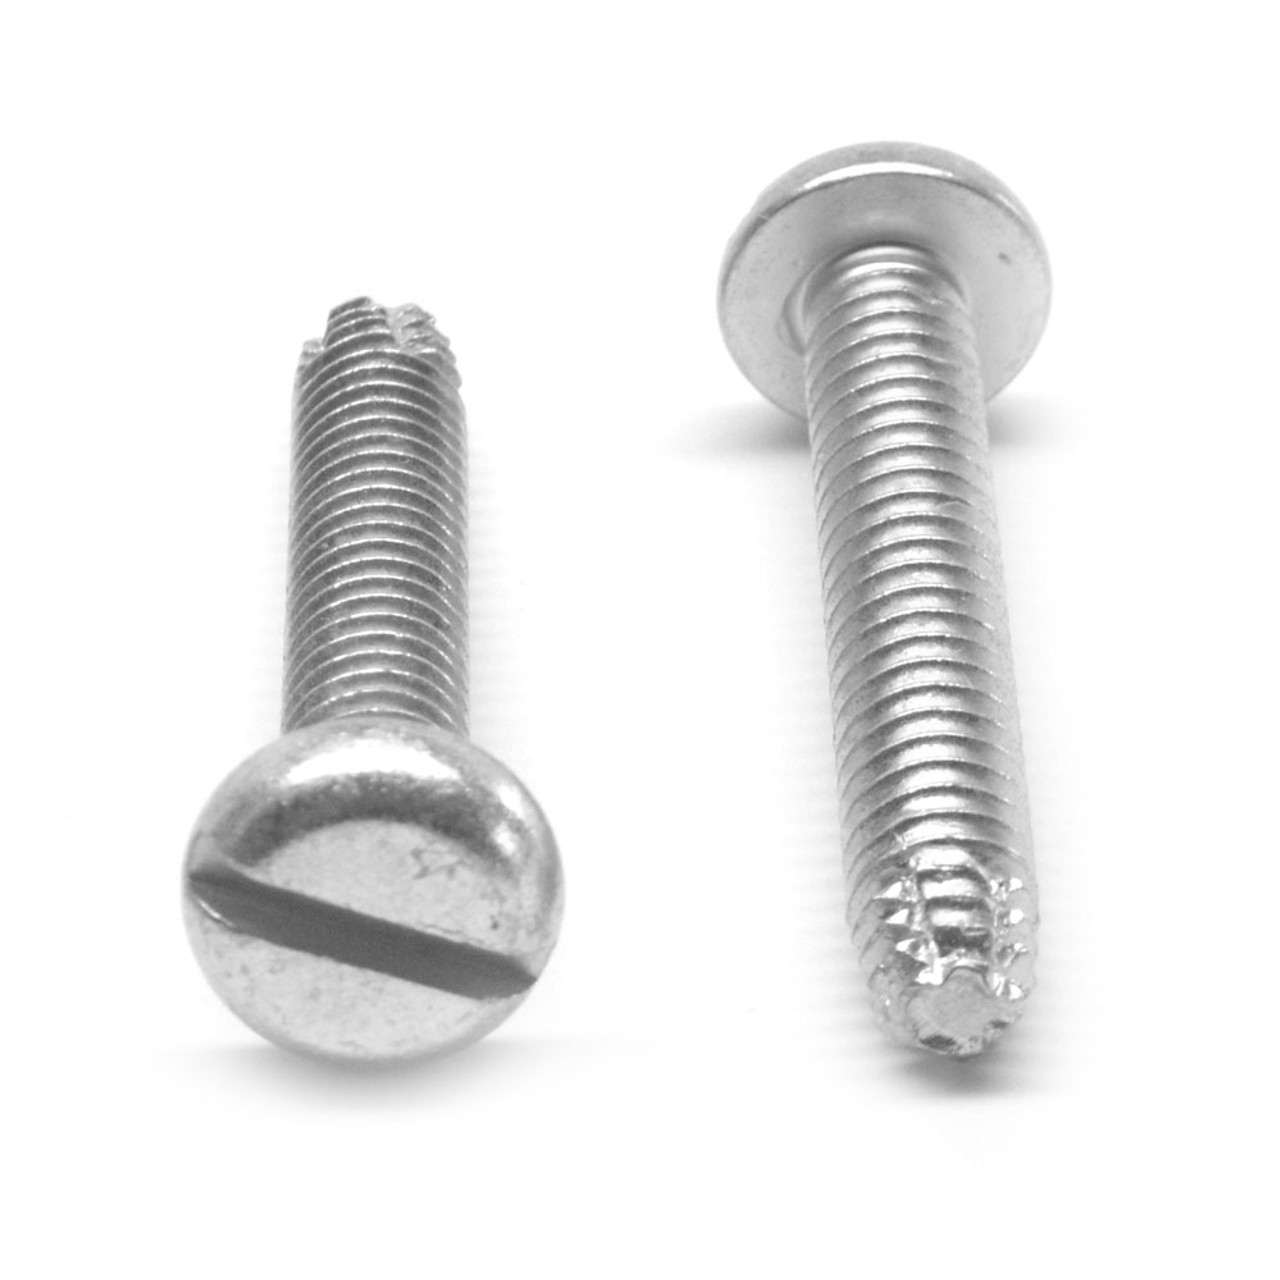 #4-40 x 1" (FT) Coarse Thread Thread Cutting Screw Slotted Pan Head Type F Low Carbon Steel Zinc Plated